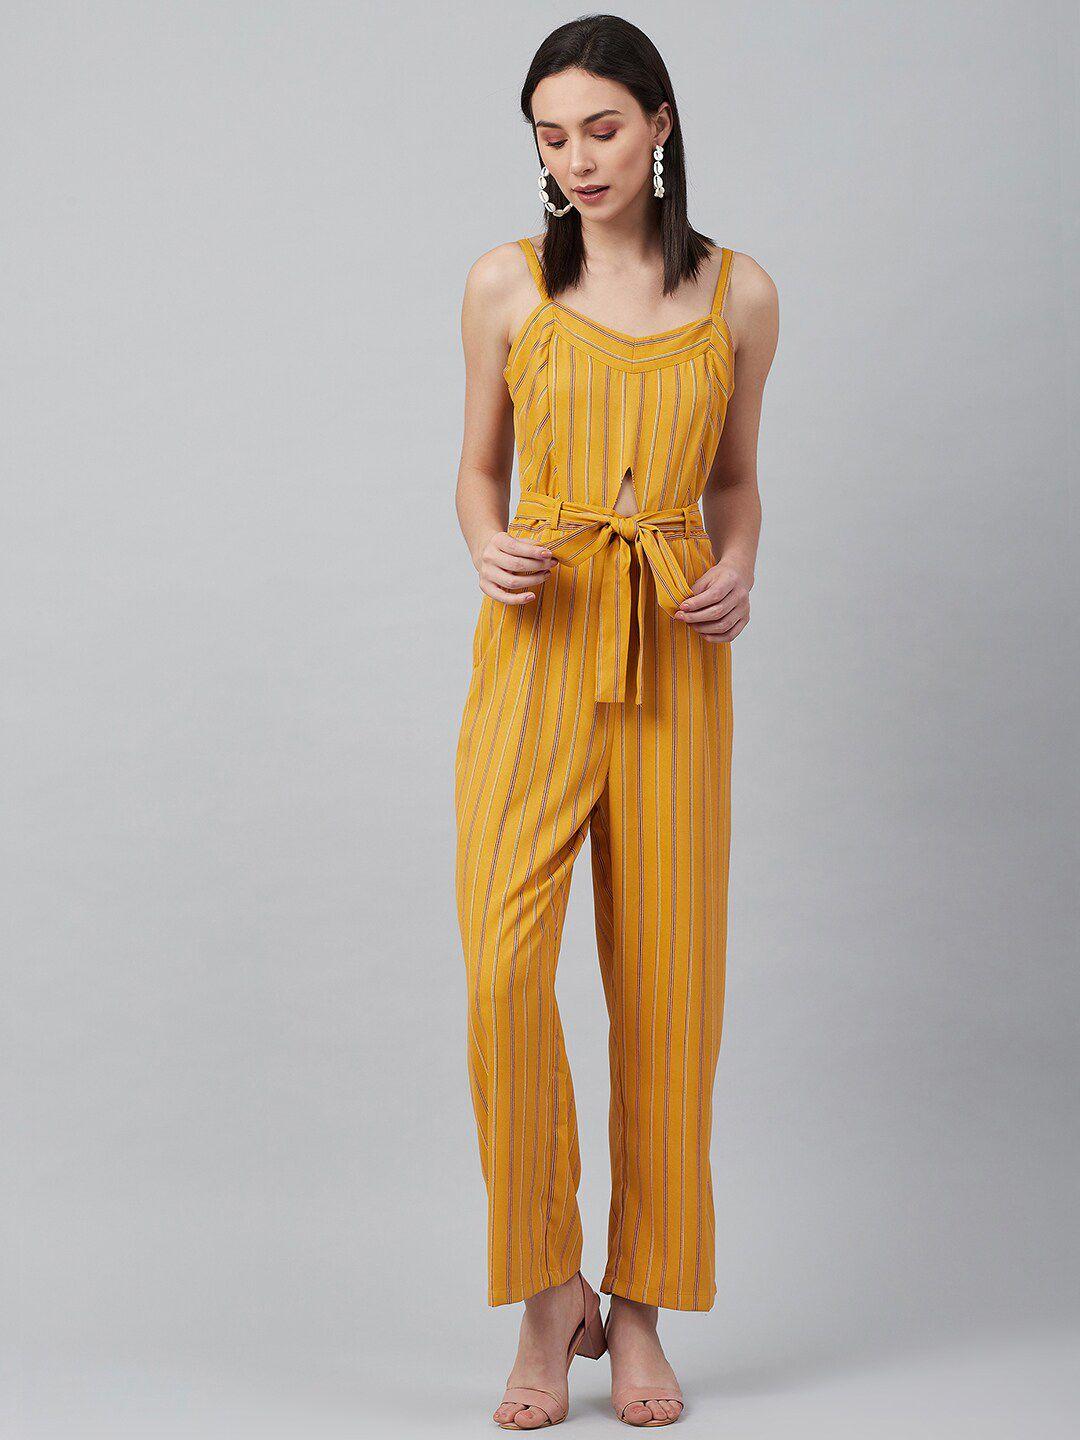 marie claire women mustard & maroon striped basic jumpsuit